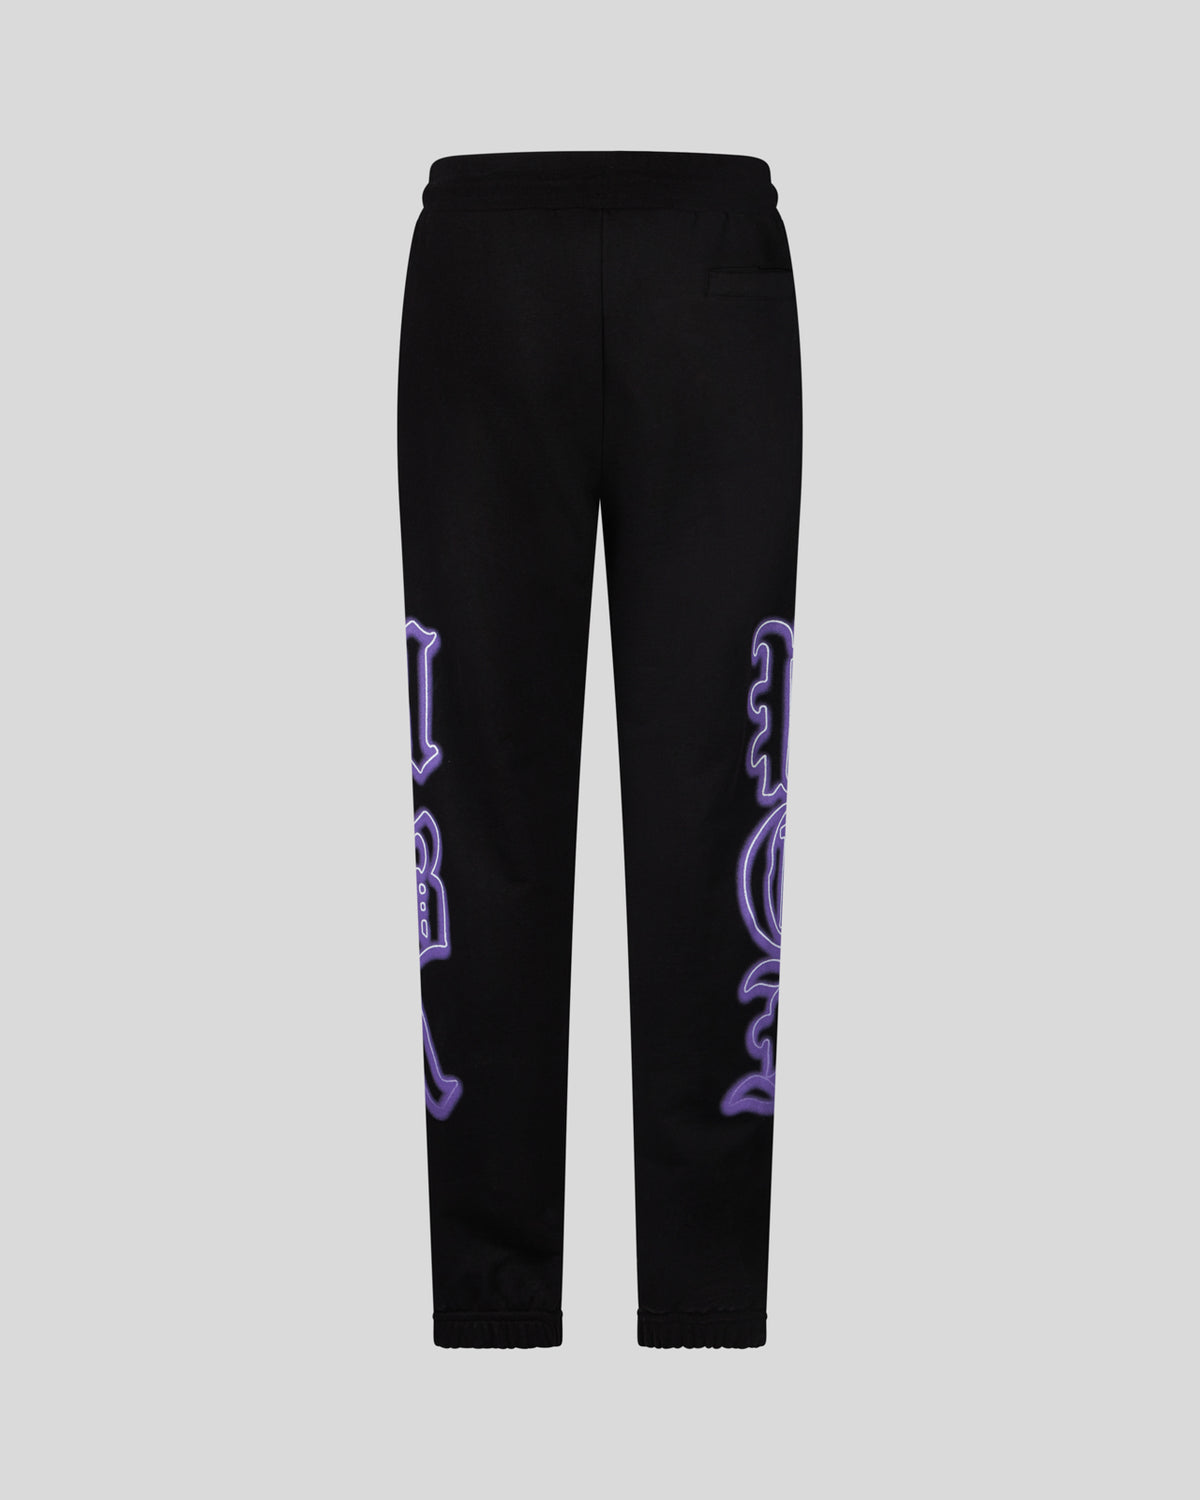 PHOBIA BLACK PANT WITH GOTHIC SK PRINT